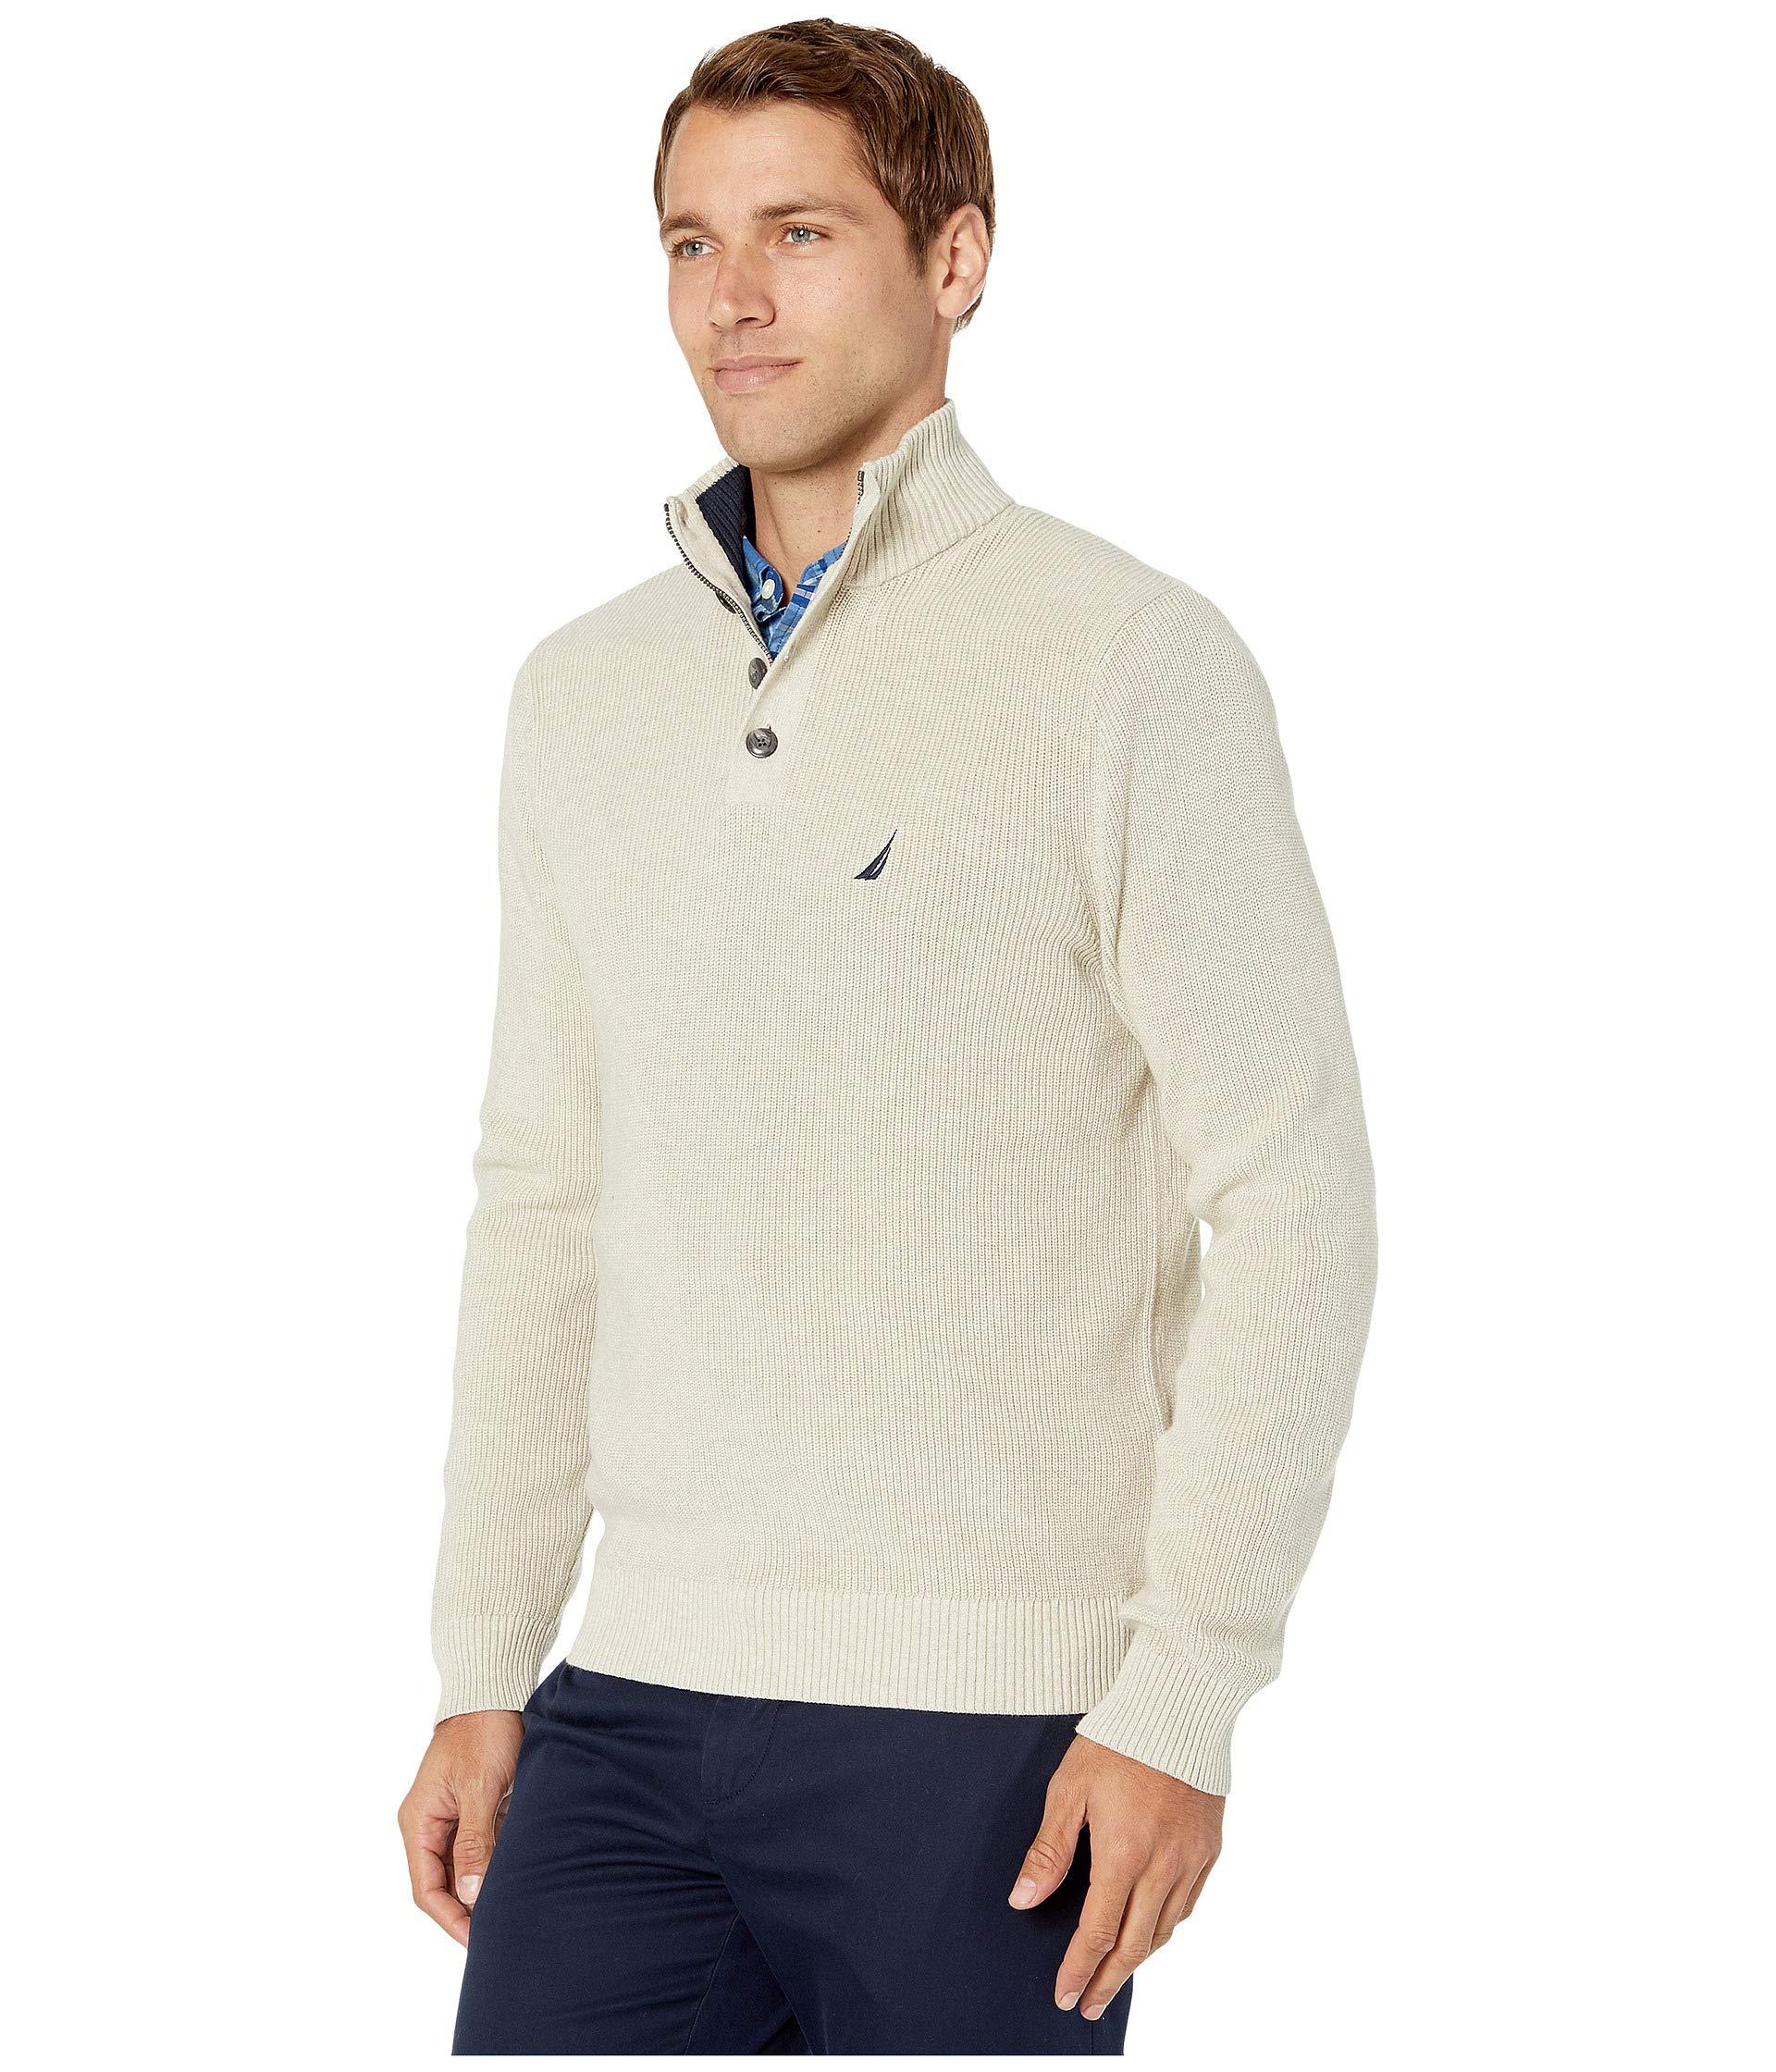 Nautica Cotton Button Mock Neck Sweater in Beige (Natural) for Men - Lyst